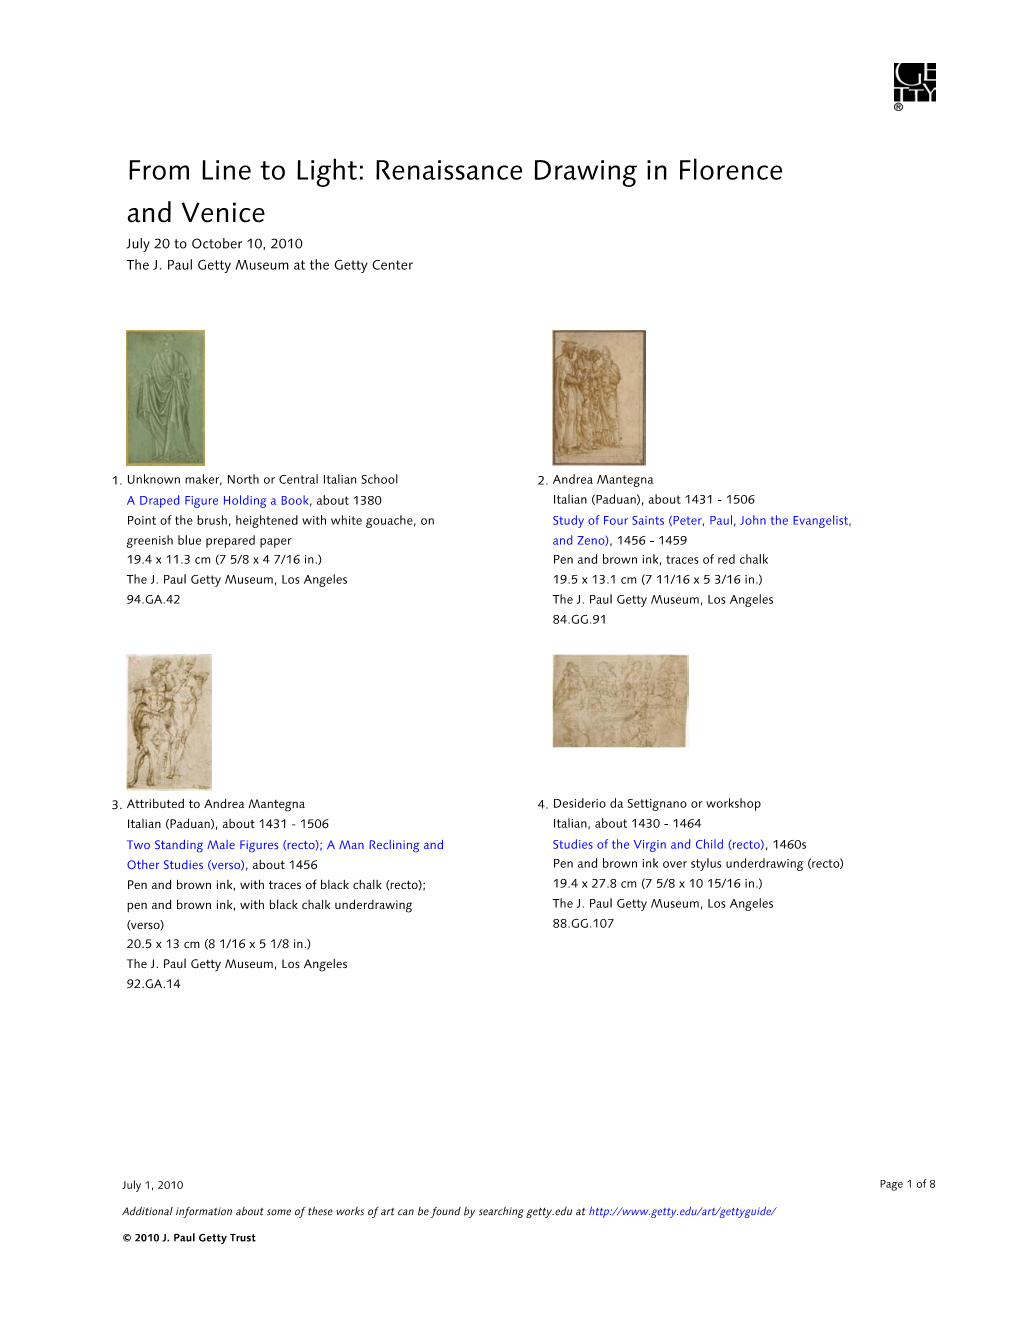 From Line to Light: Renaissance Drawing in Florence and Venice July 20 to October 10, 2010 the J